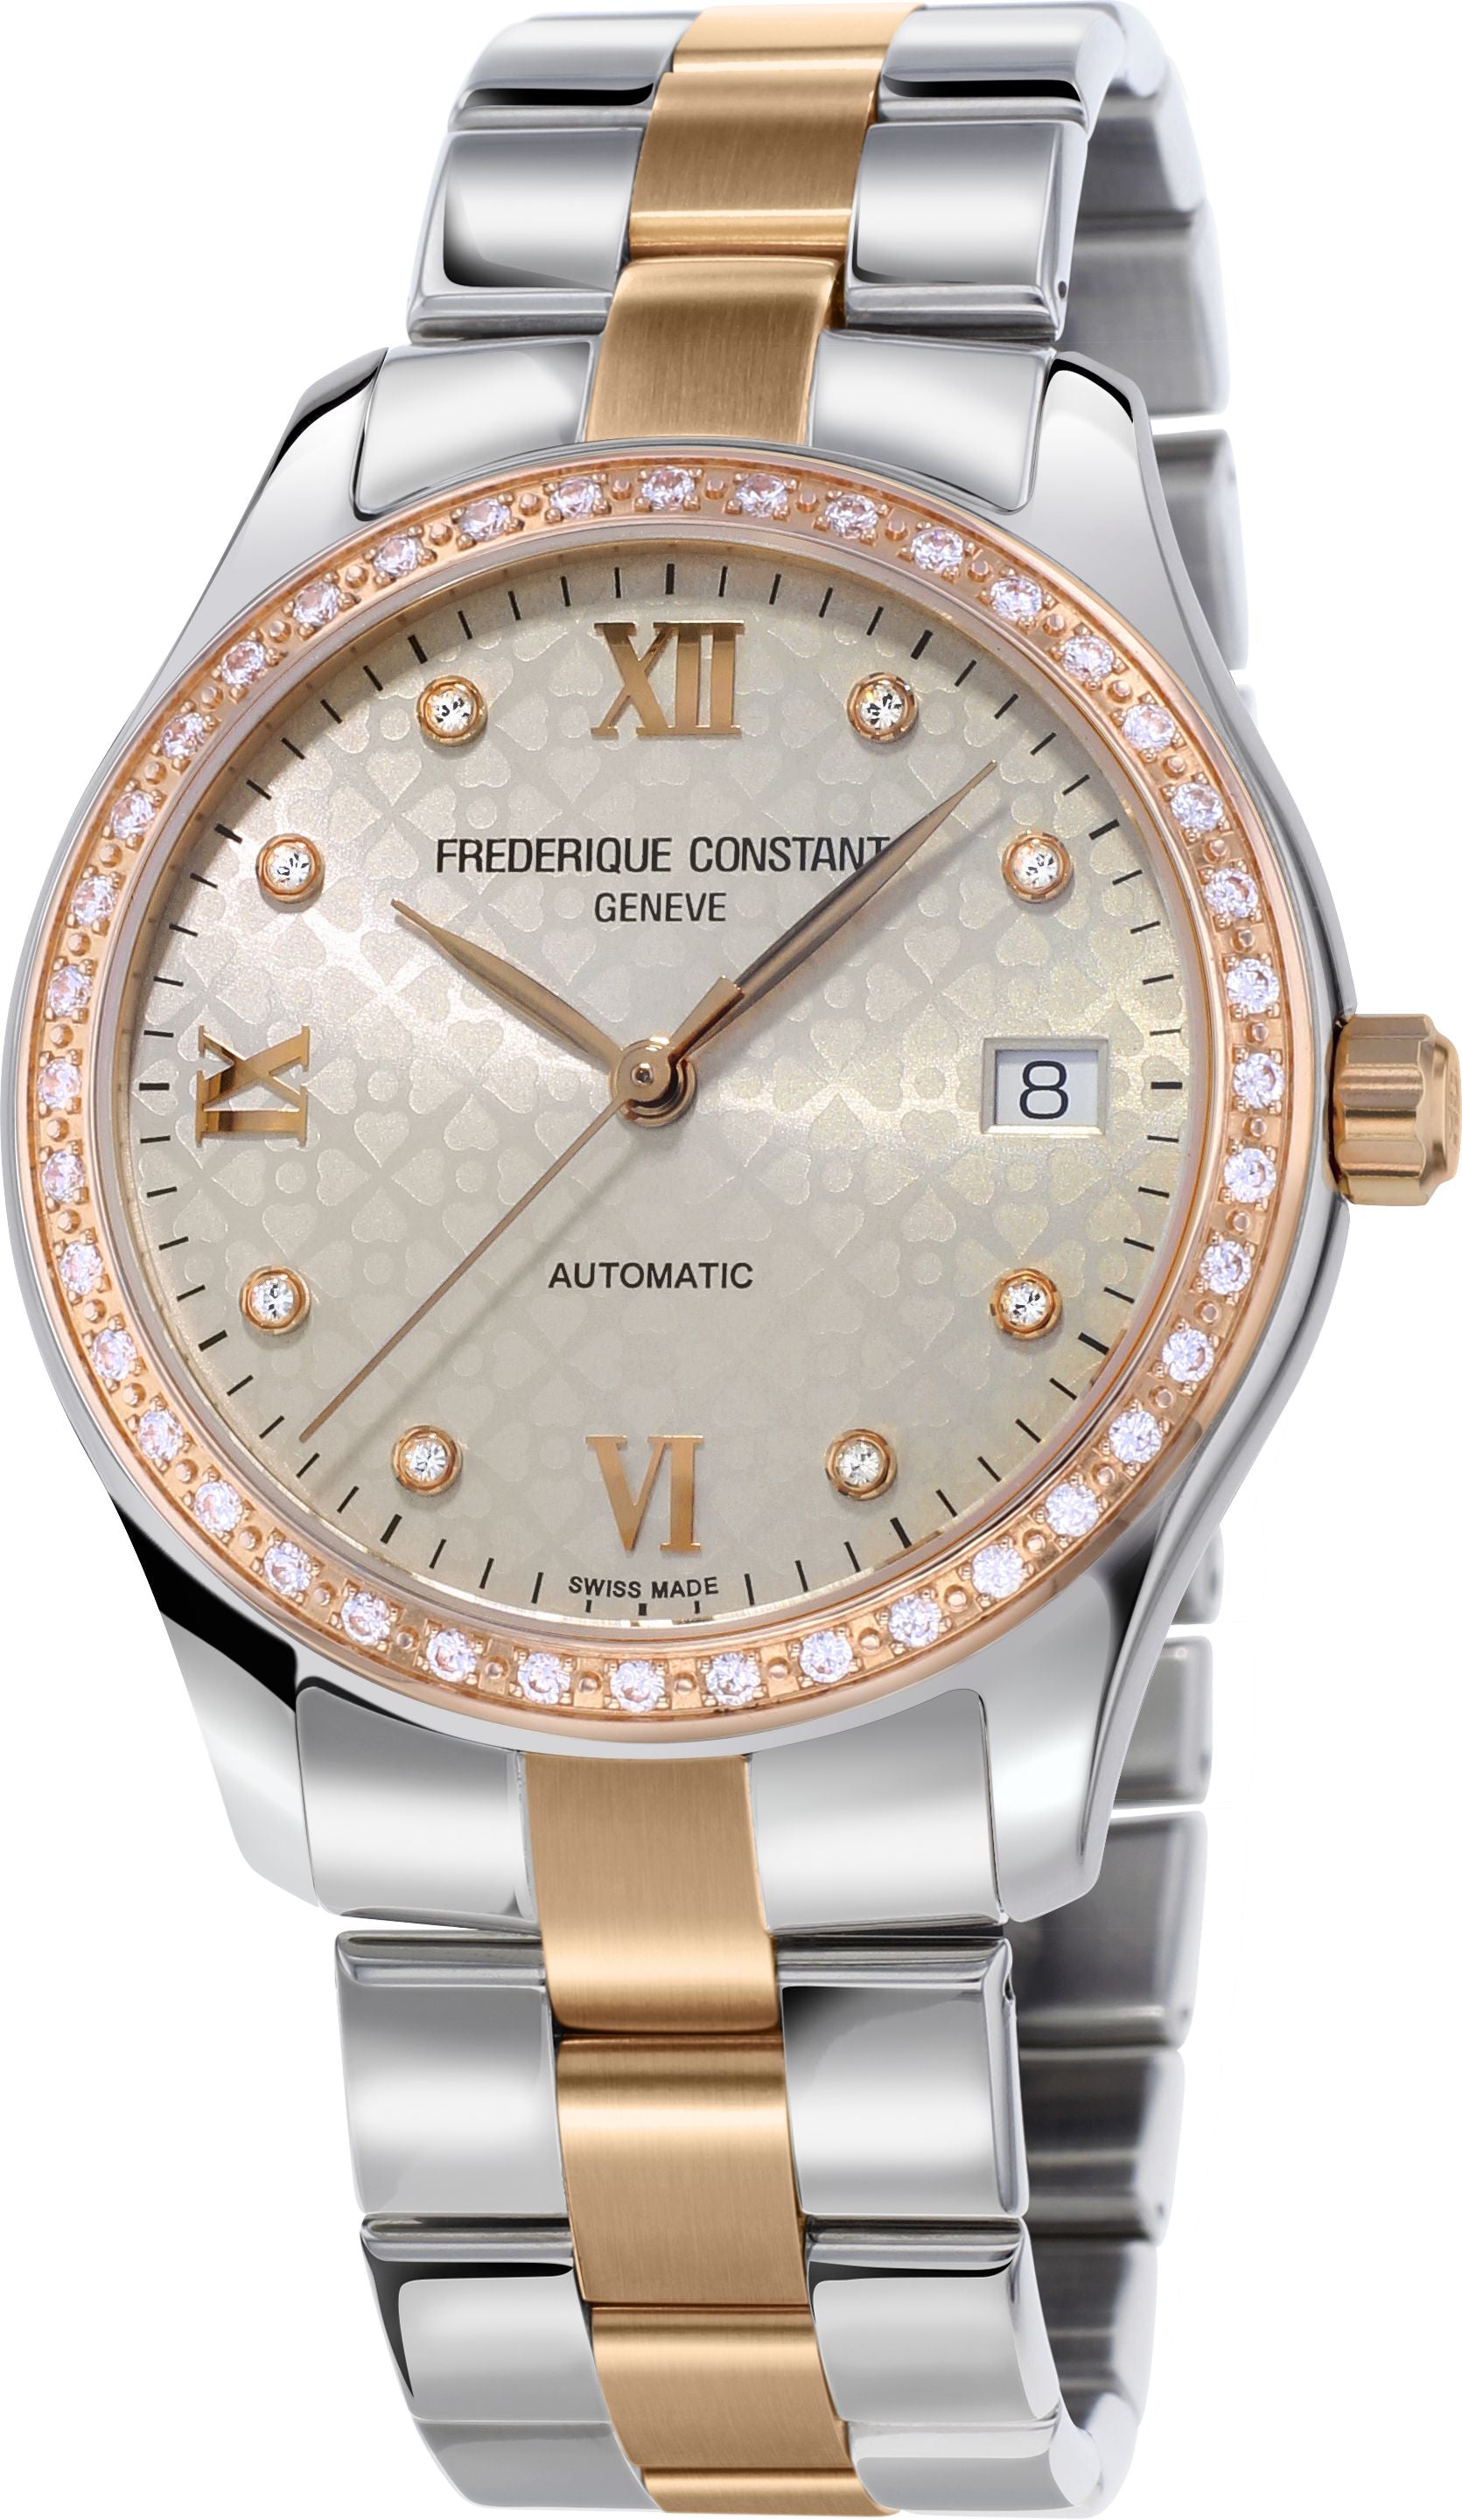 FREDERIQUE CONSTANT LADIES STAINLESS STEEL Two-Tone Automatic LADIES AUTOMATIC Stainless Steel Bracelet